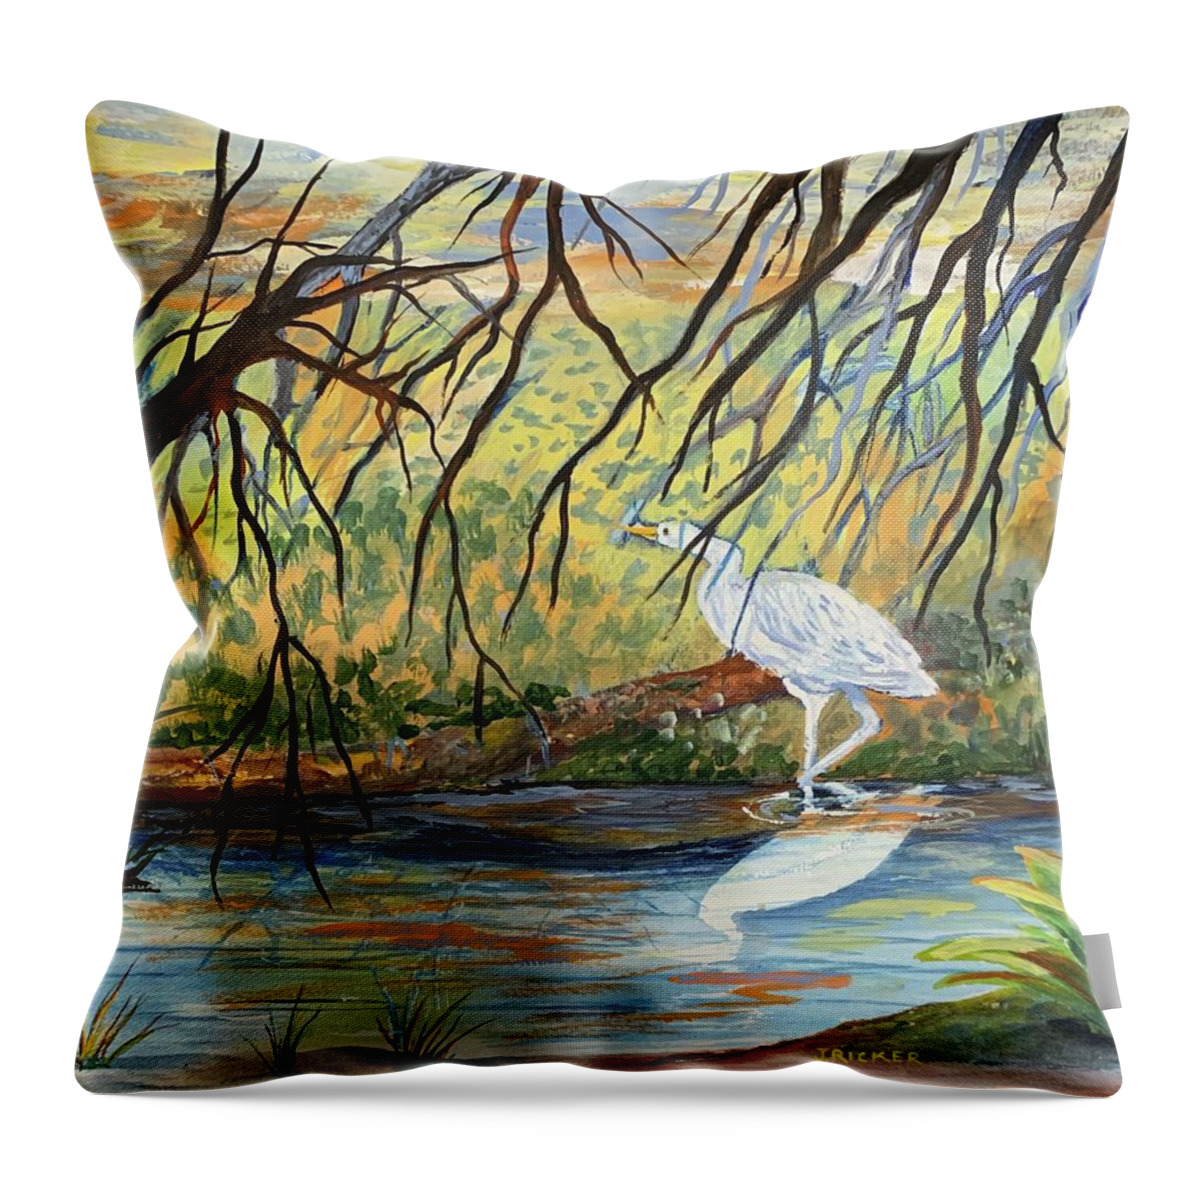 Egret Throw Pillow featuring the painting Sunset Creek by Jane Ricker